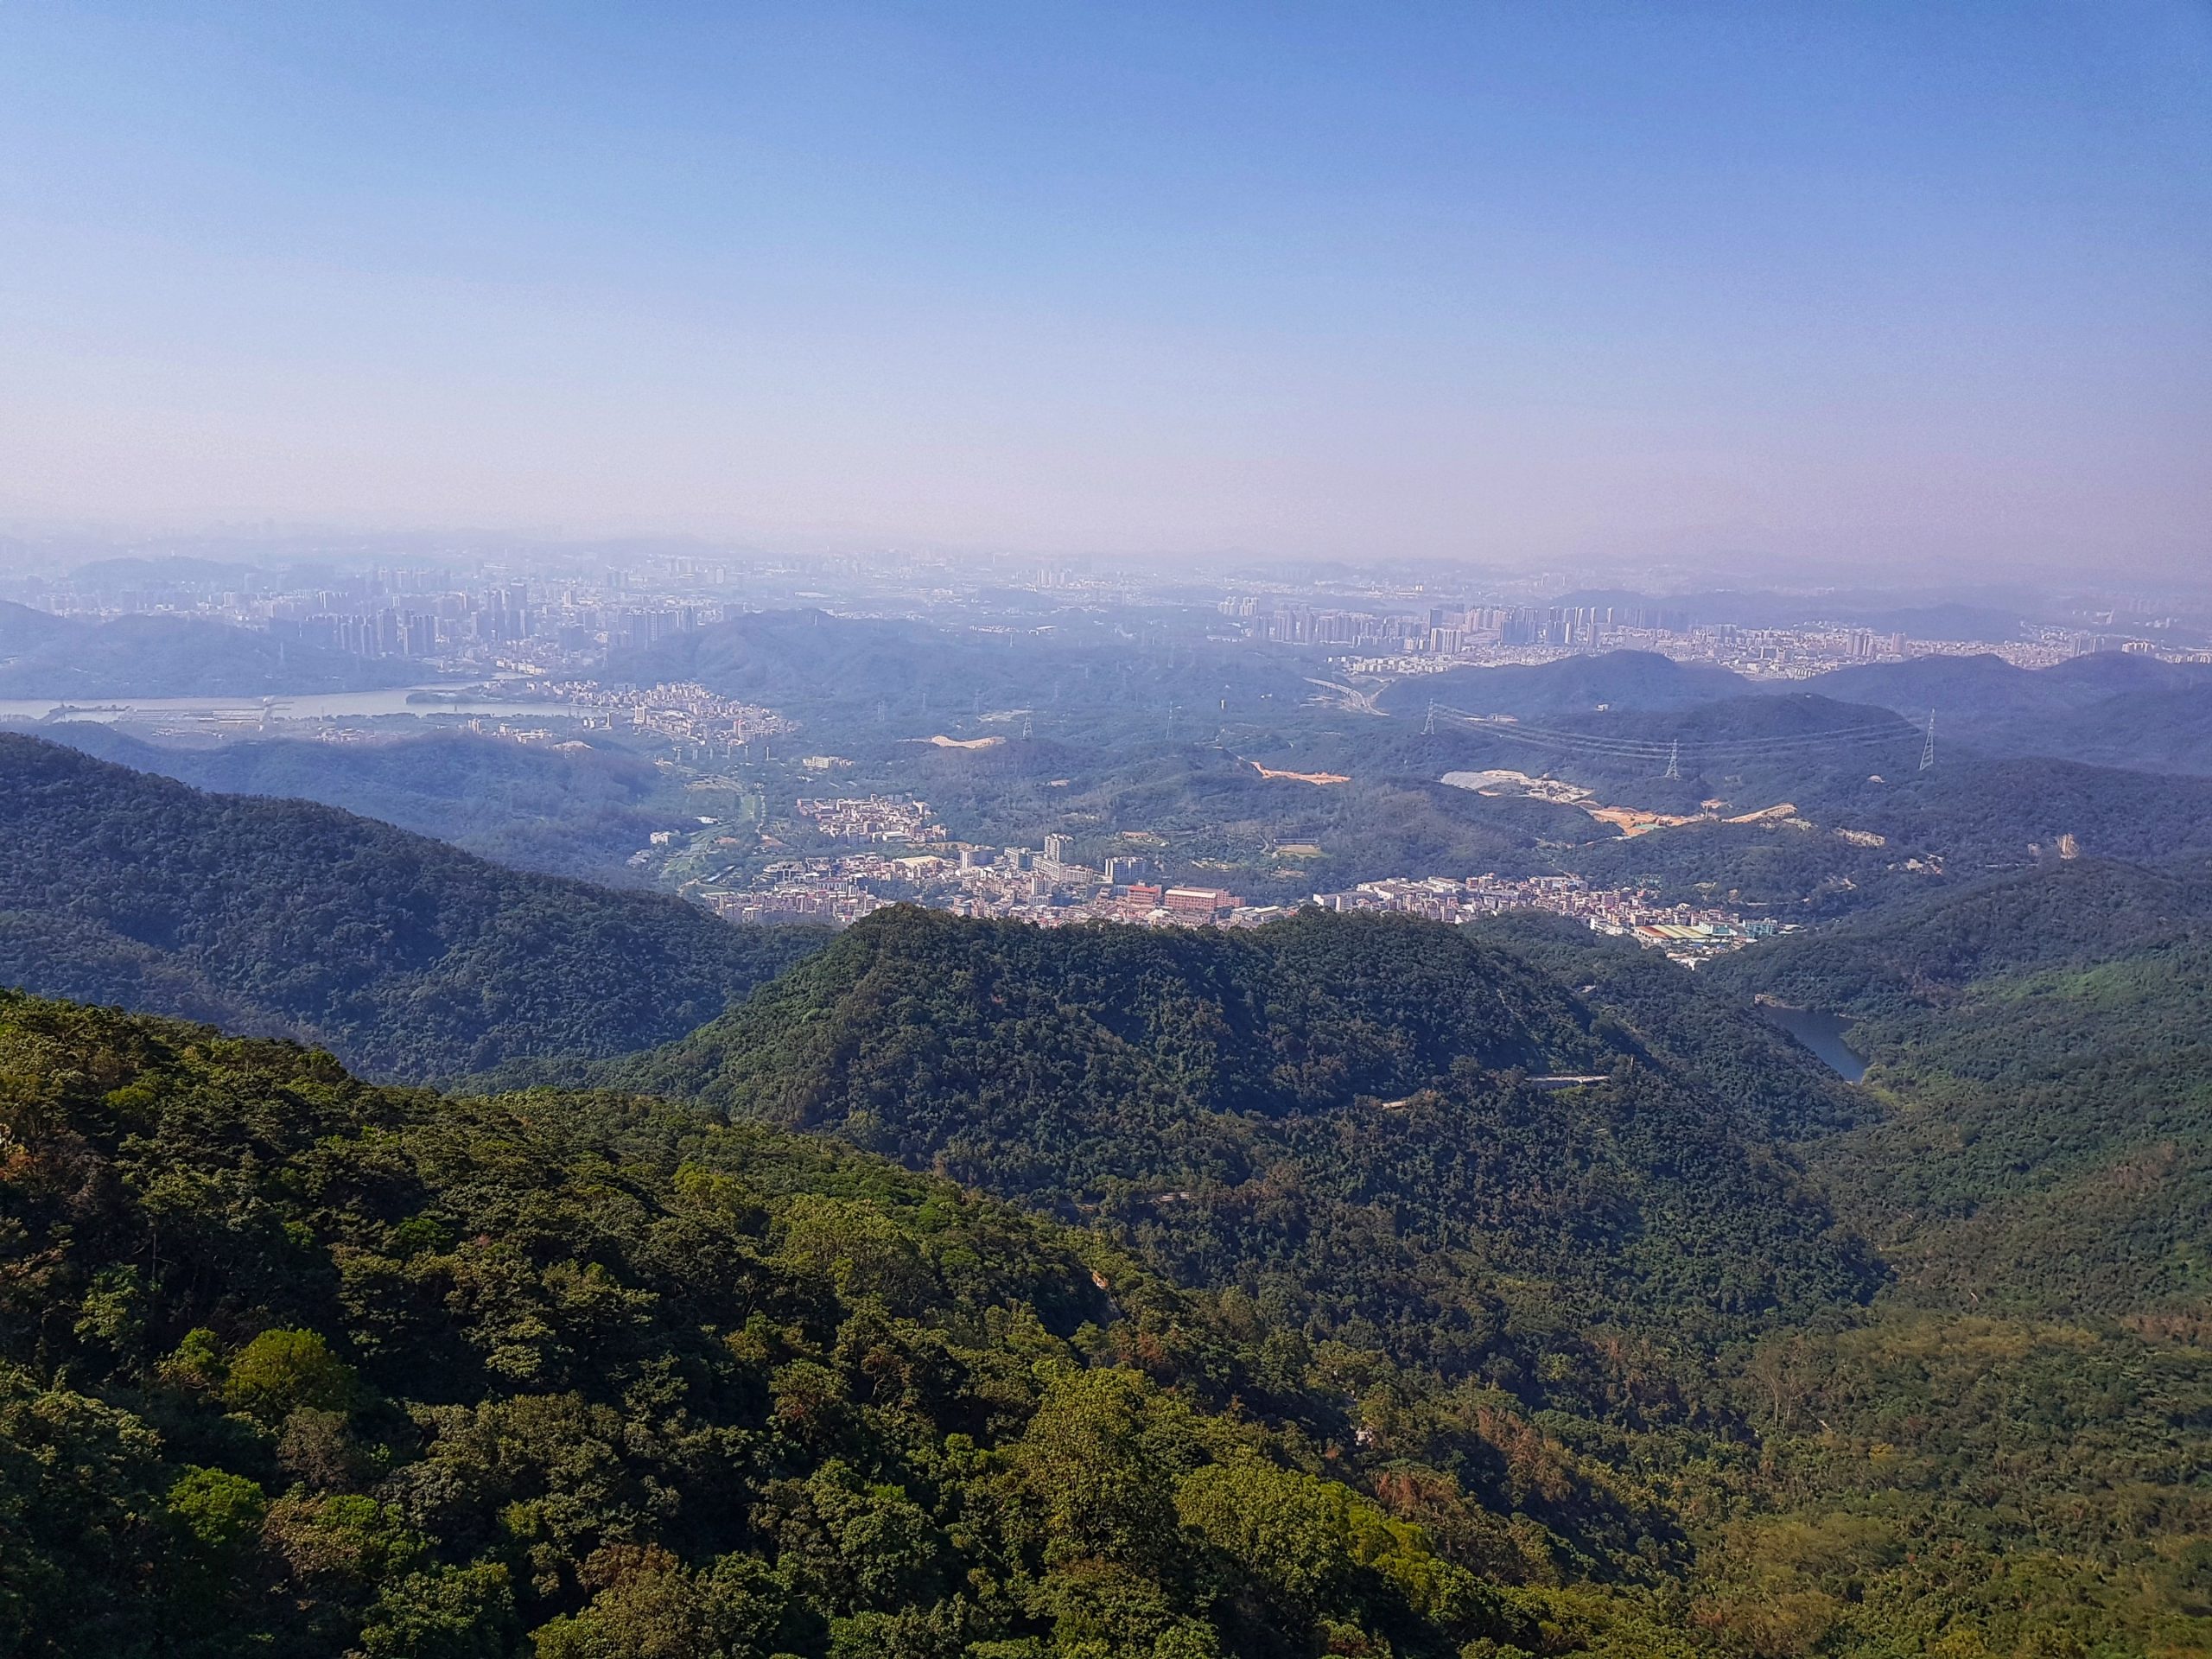 7 Best Things To Do in Shenzhen, China [with Suggested Tours]